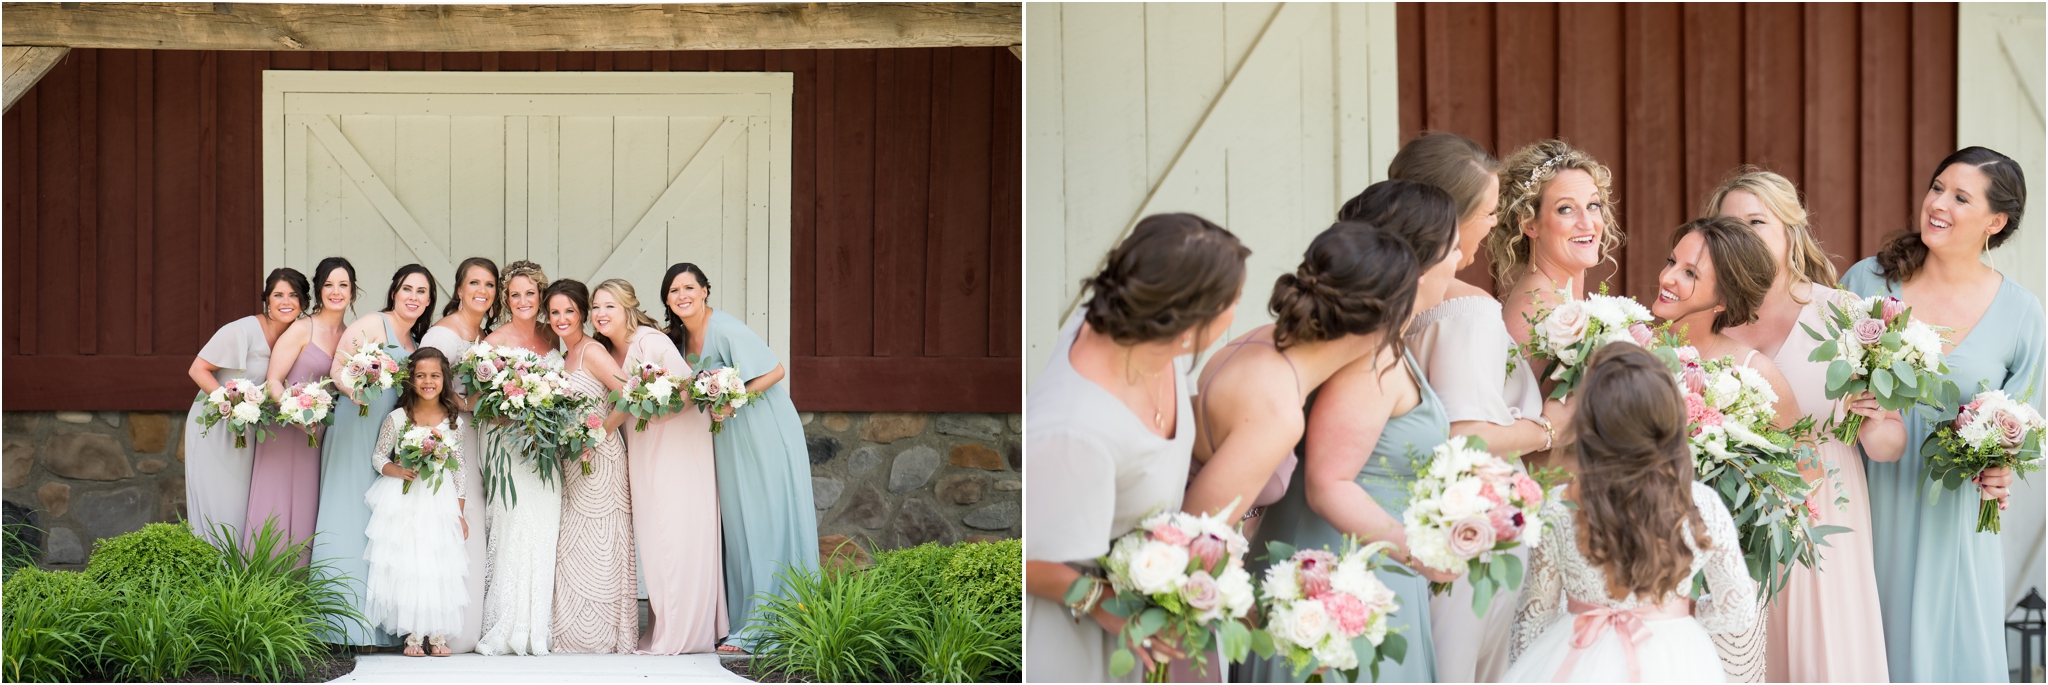 Lindley Farmstead at Chatham Hills | Sarah and Rachel Wedding Photographers | Westfield, Indiana wedding | blush wedding day colors